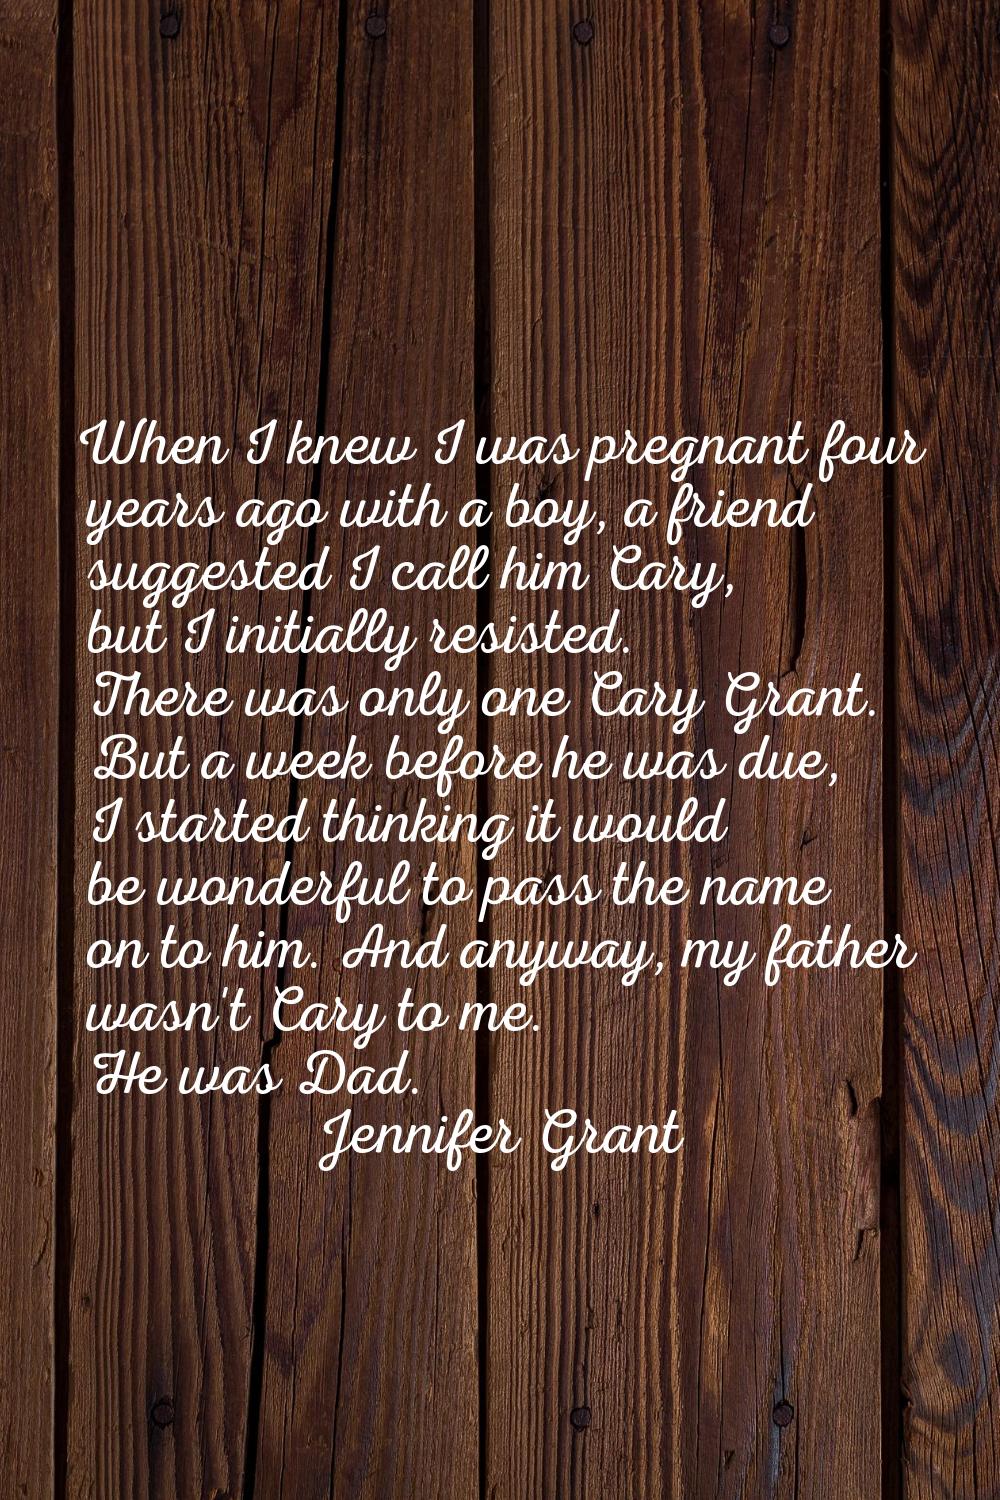 When I knew I was pregnant four years ago with a boy, a friend suggested I call him Cary, but I ini